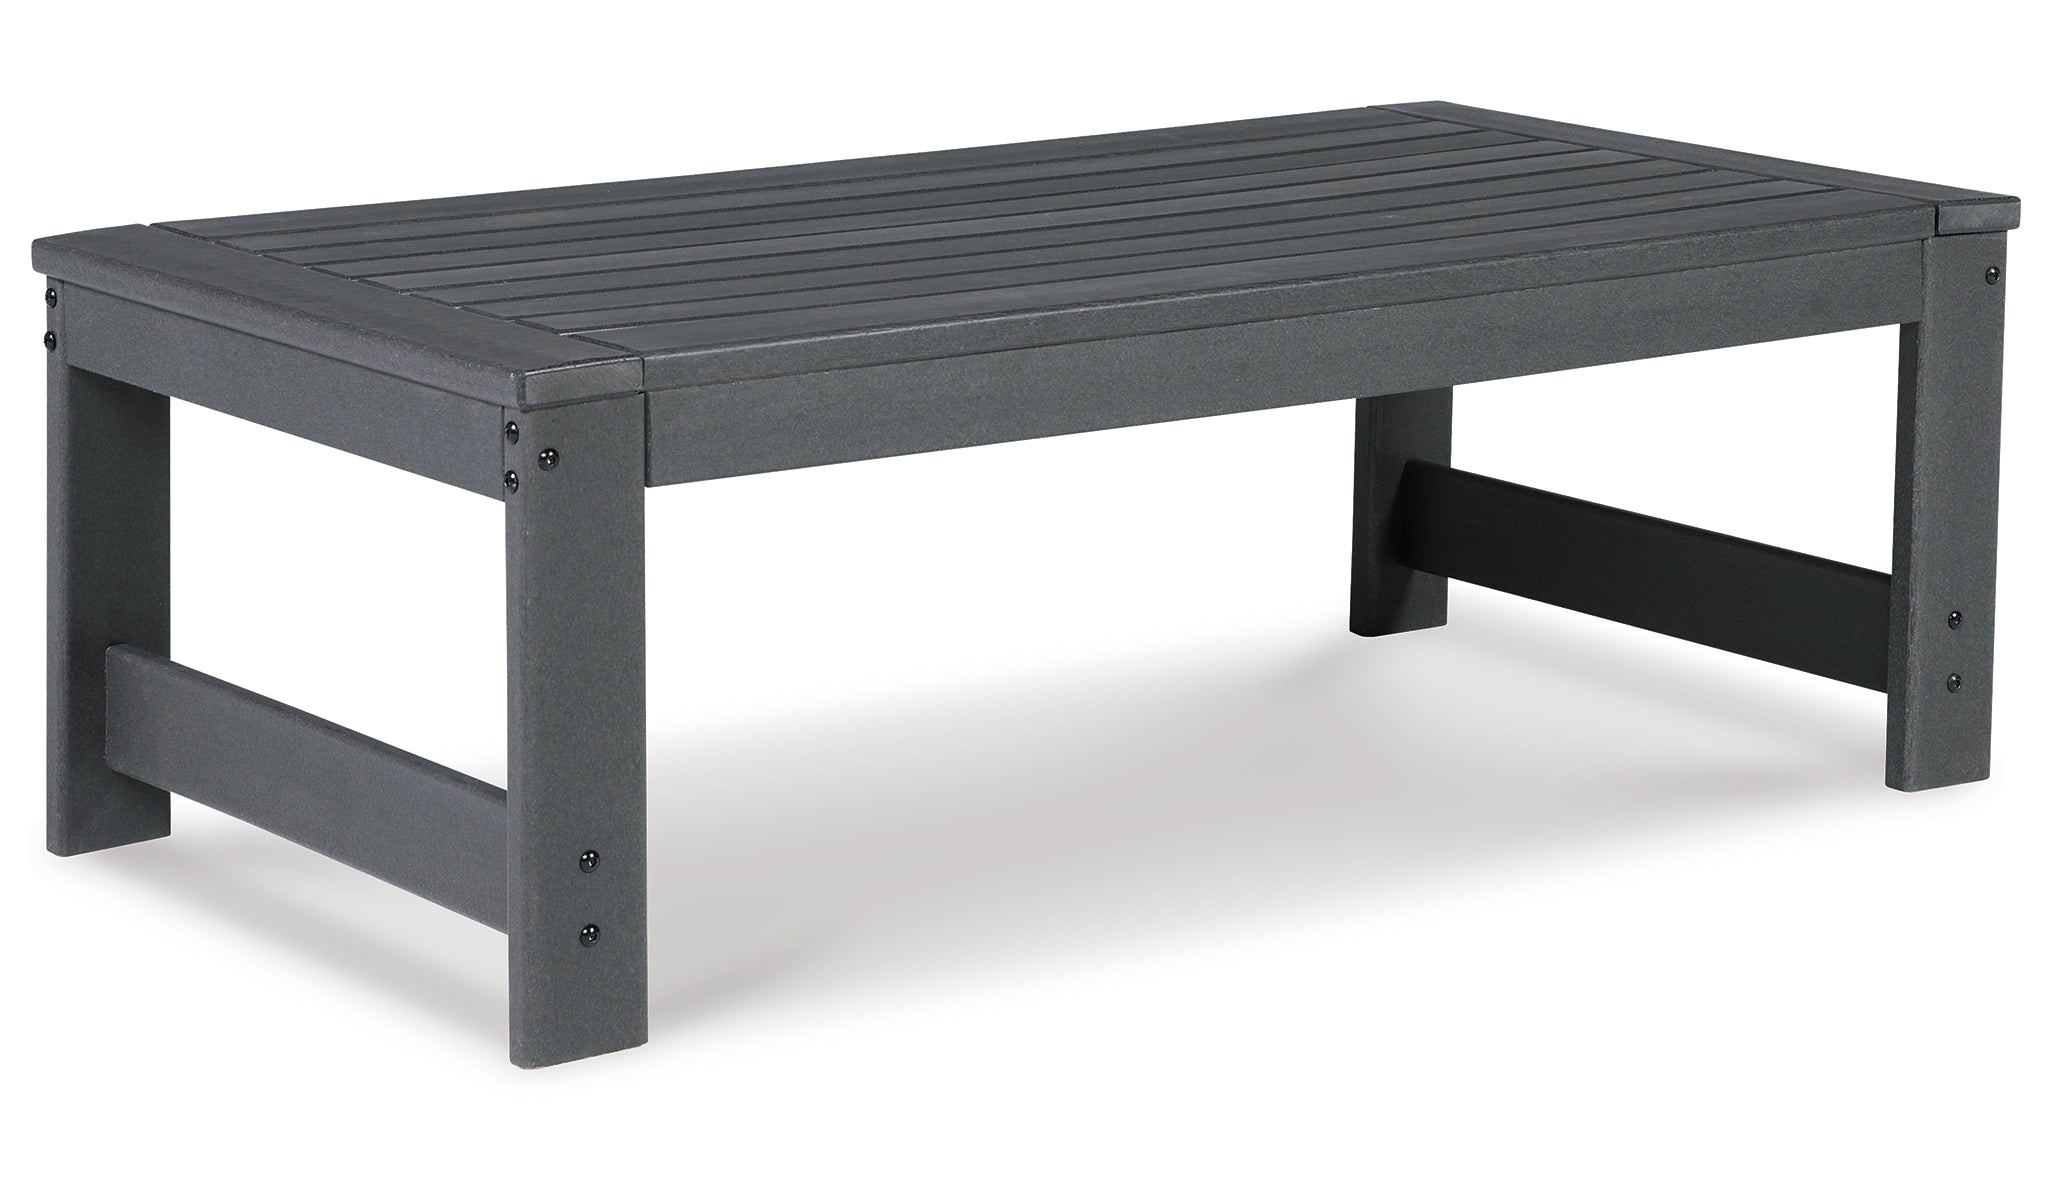 Amora Outdoor Sofa with Coffee Table